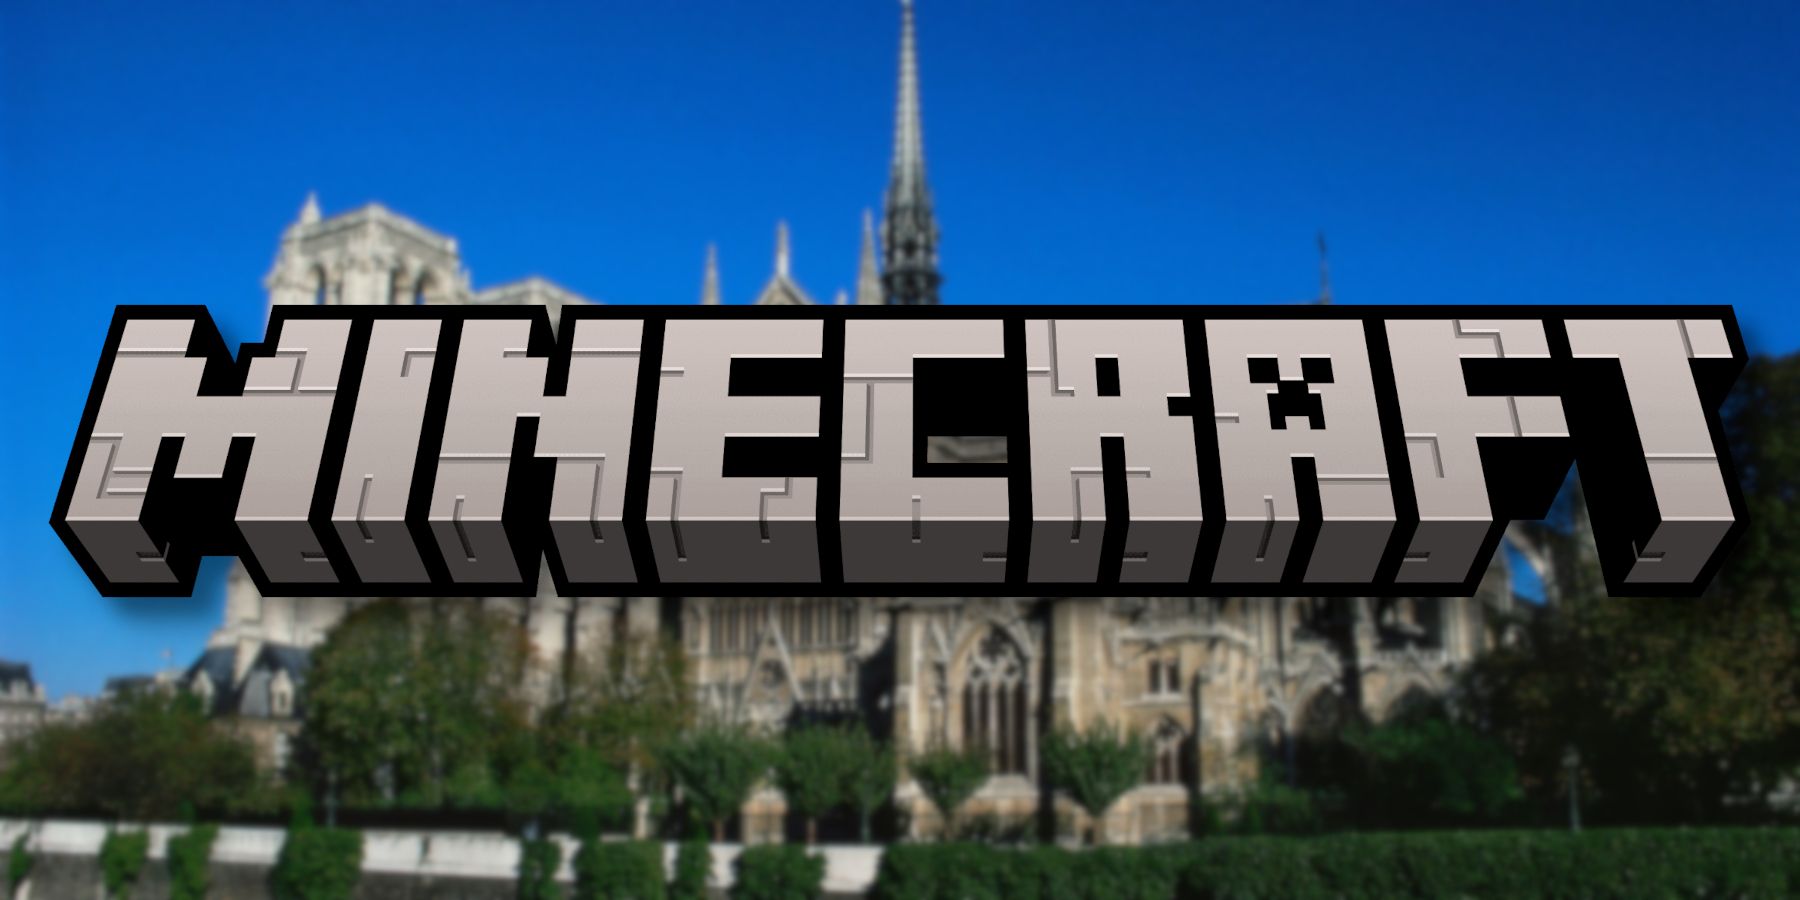 Slightly blurry photo of the Notre Dame Cathedral with the Minecraft logo in front of it.